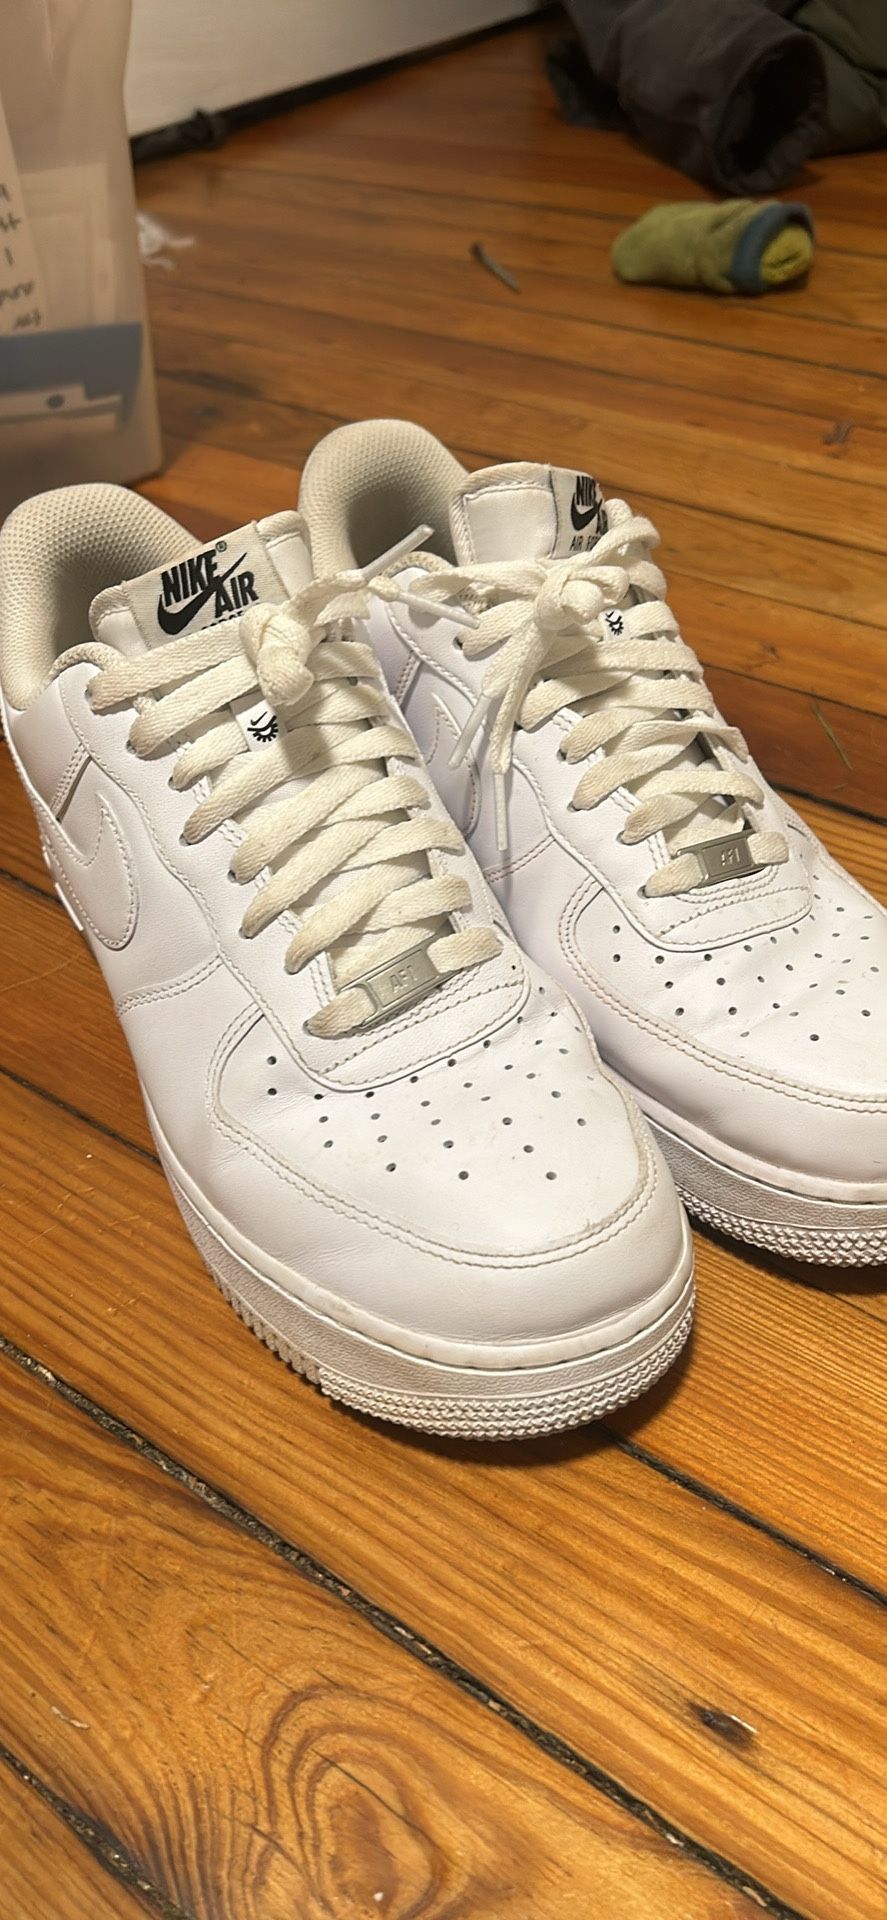 Nike Air Force 1 Low “Flyease”